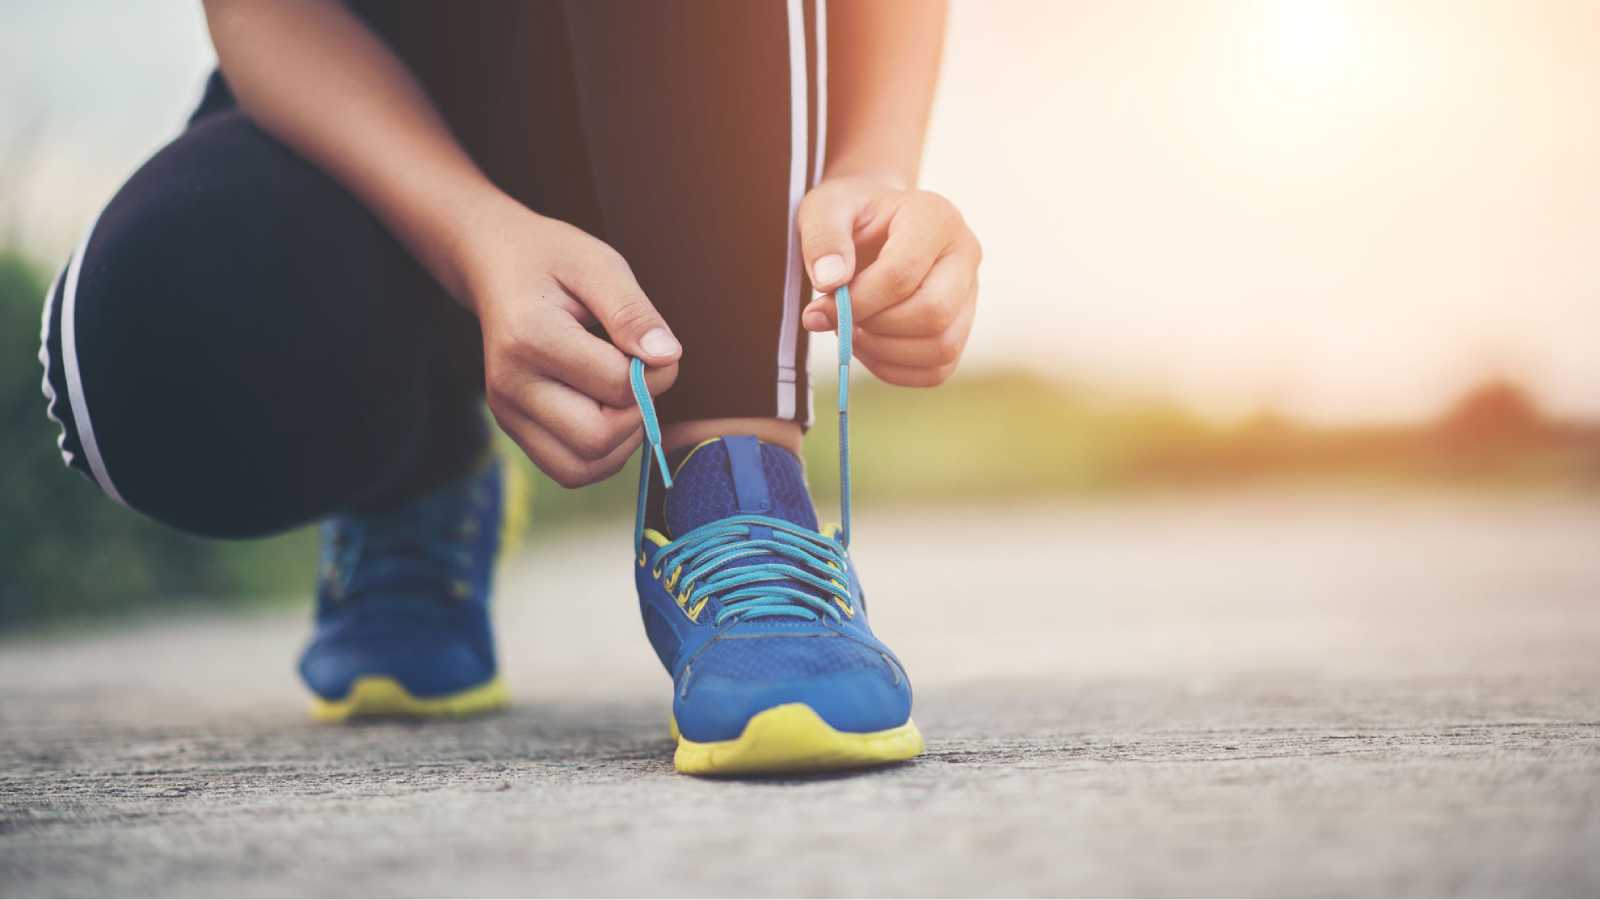 Get in shape with these 5 free walking apps